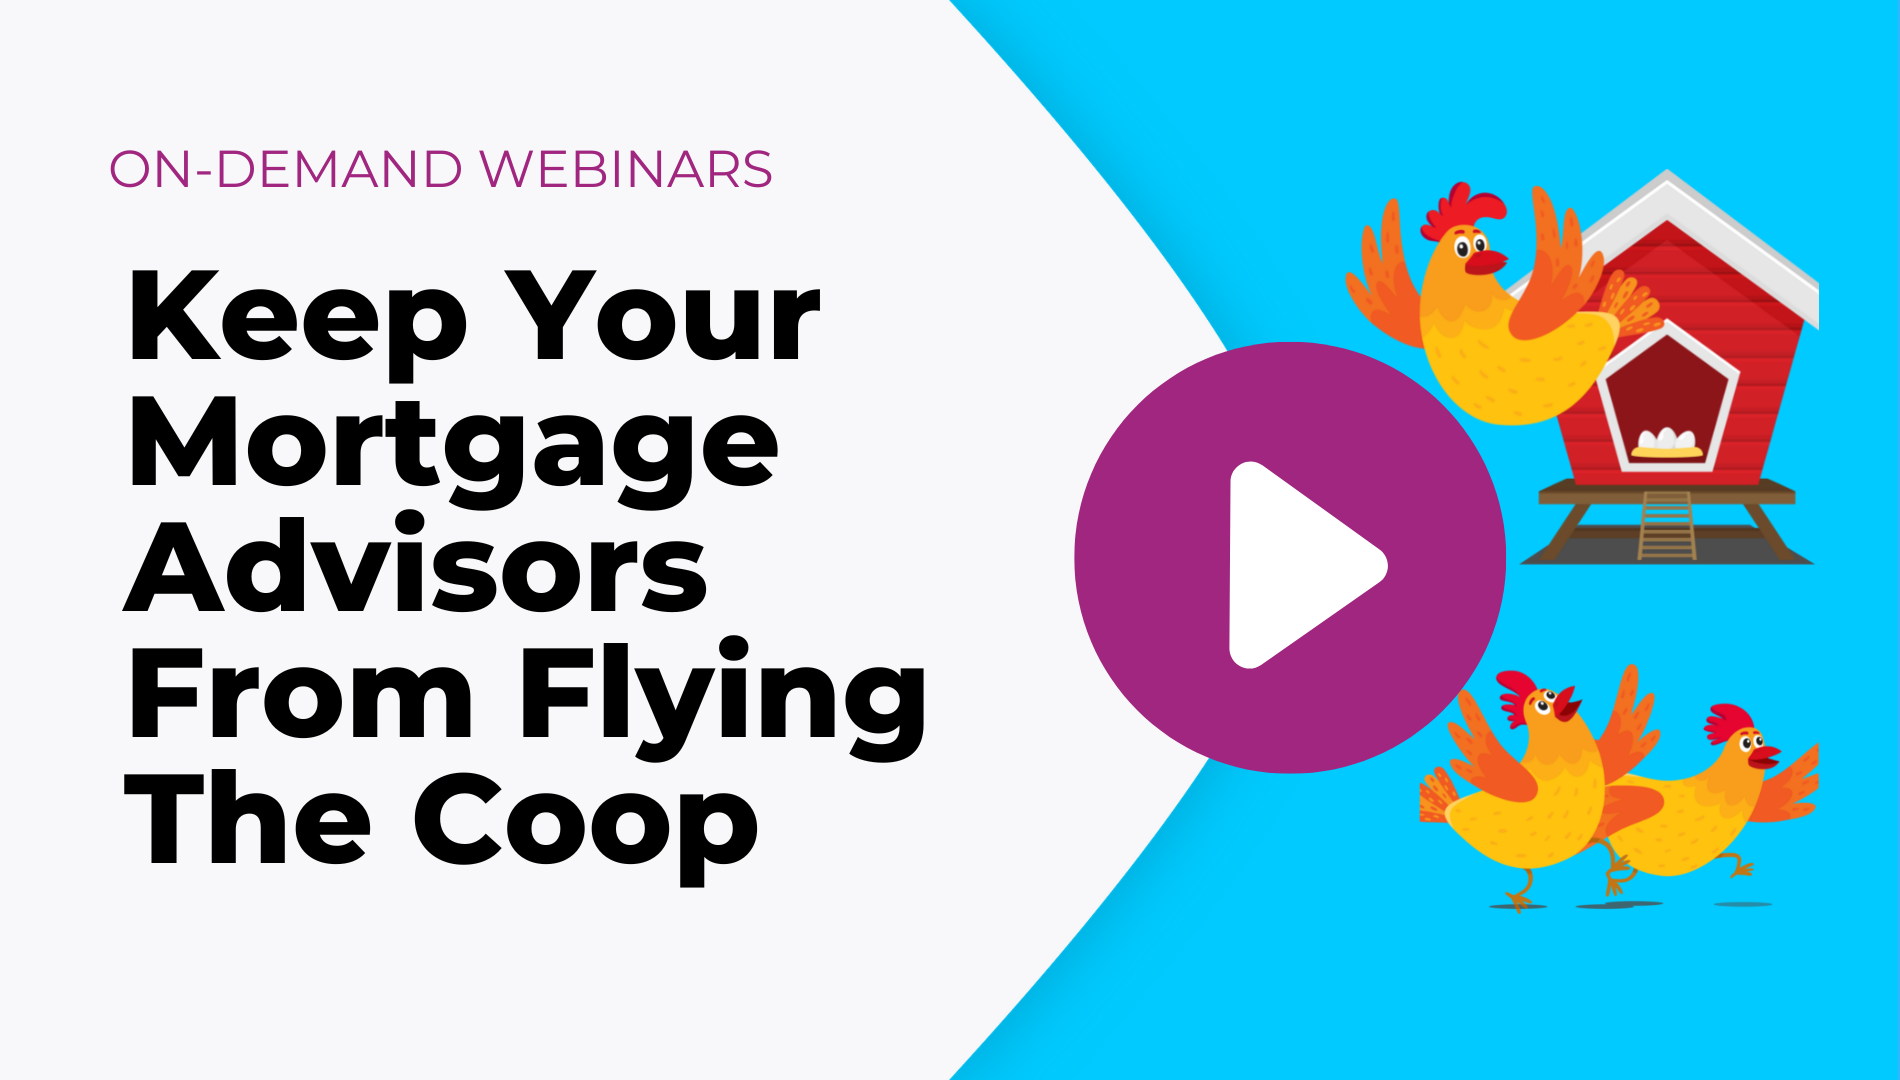 Keep Your Mortgage Advisors From Flying the Coop